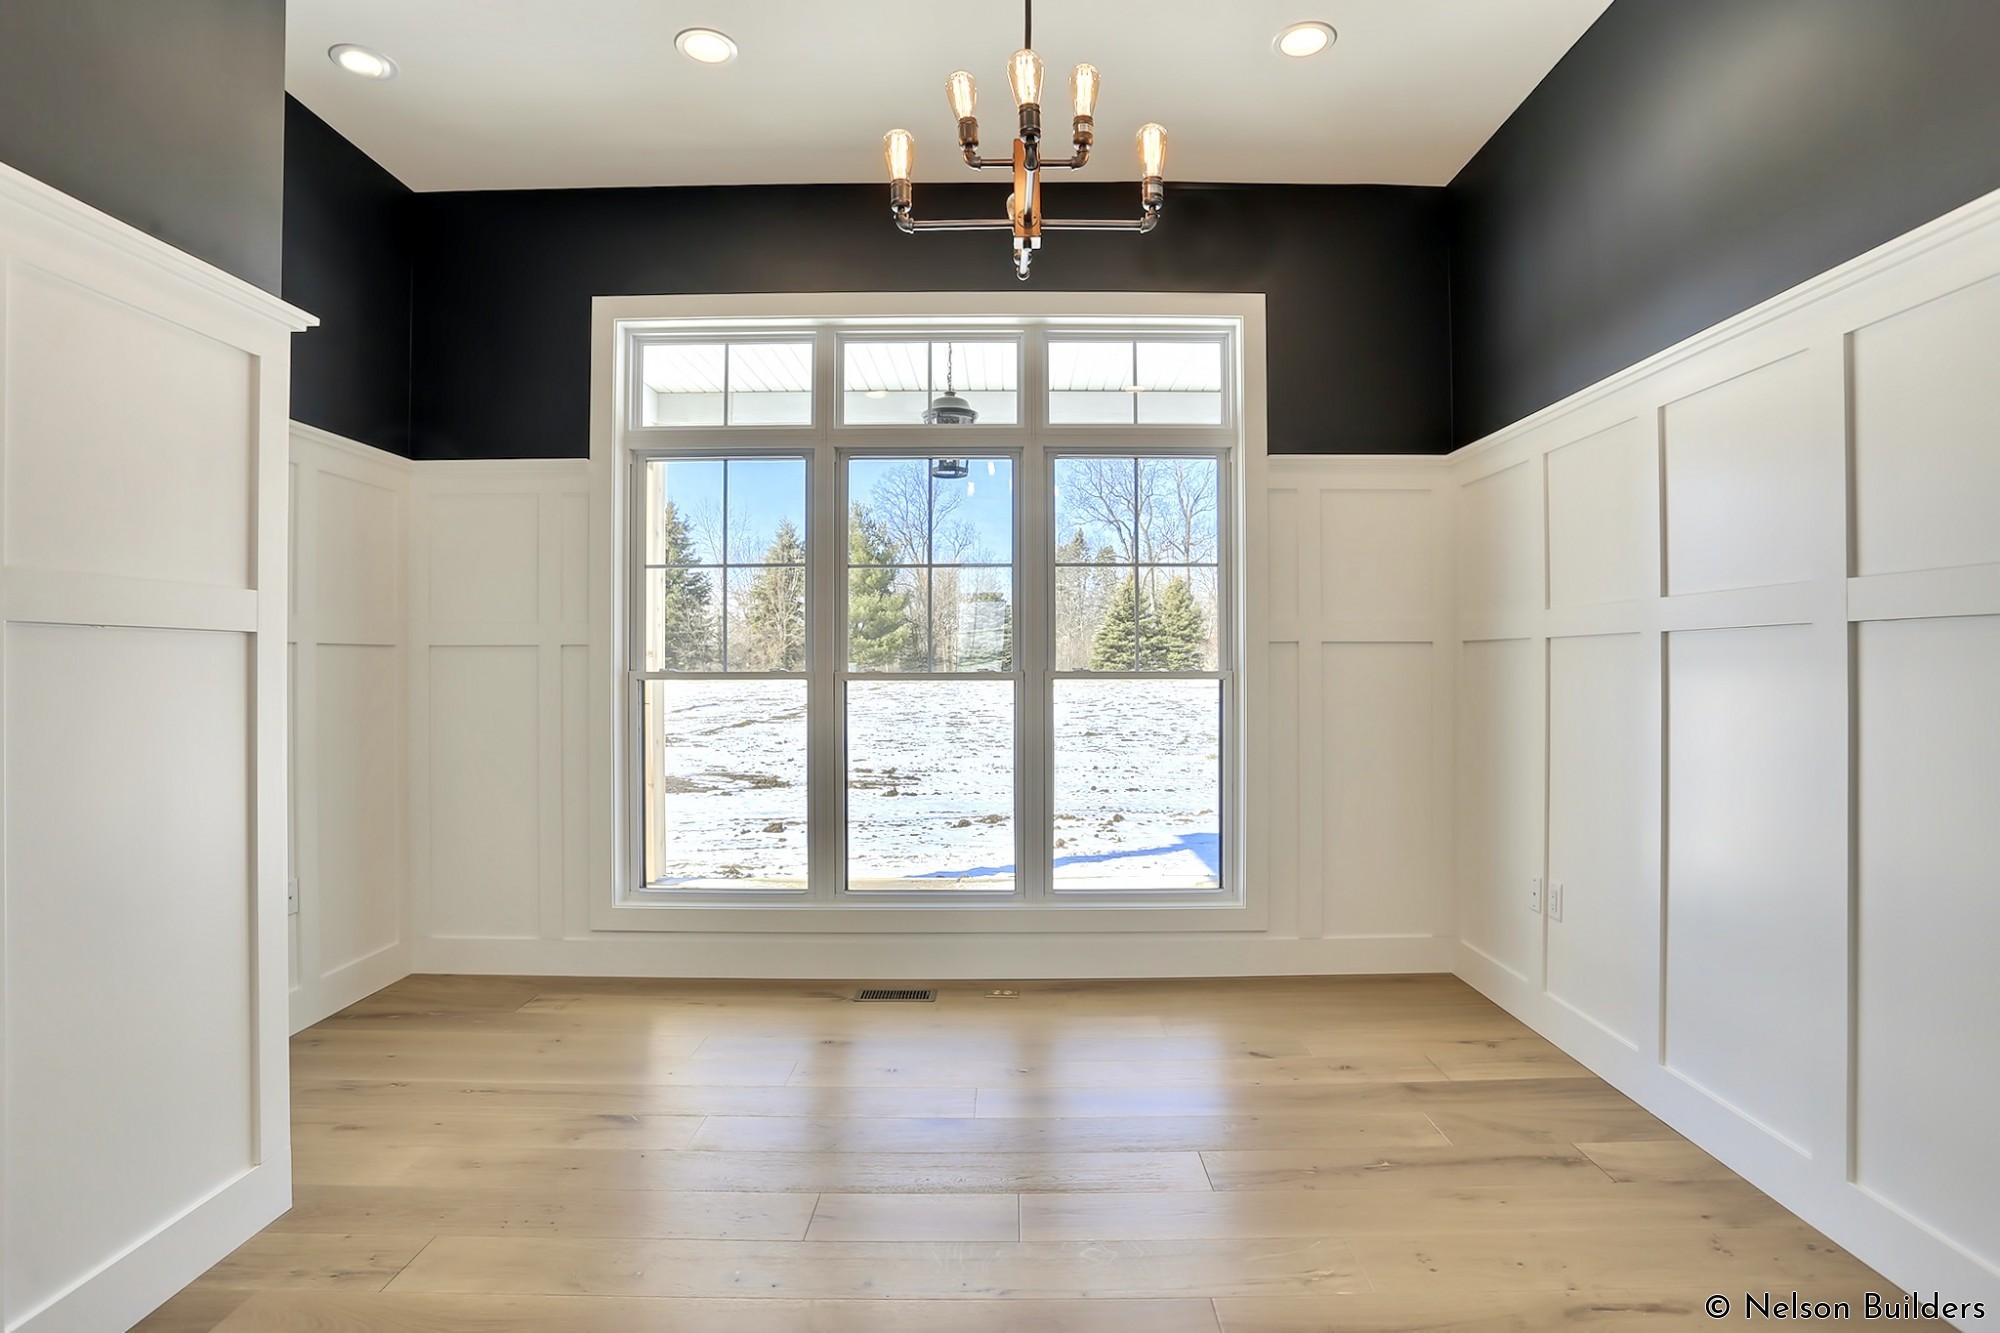 A formal office is found near the master bedroom and is adorned with paneled walls and black accents.